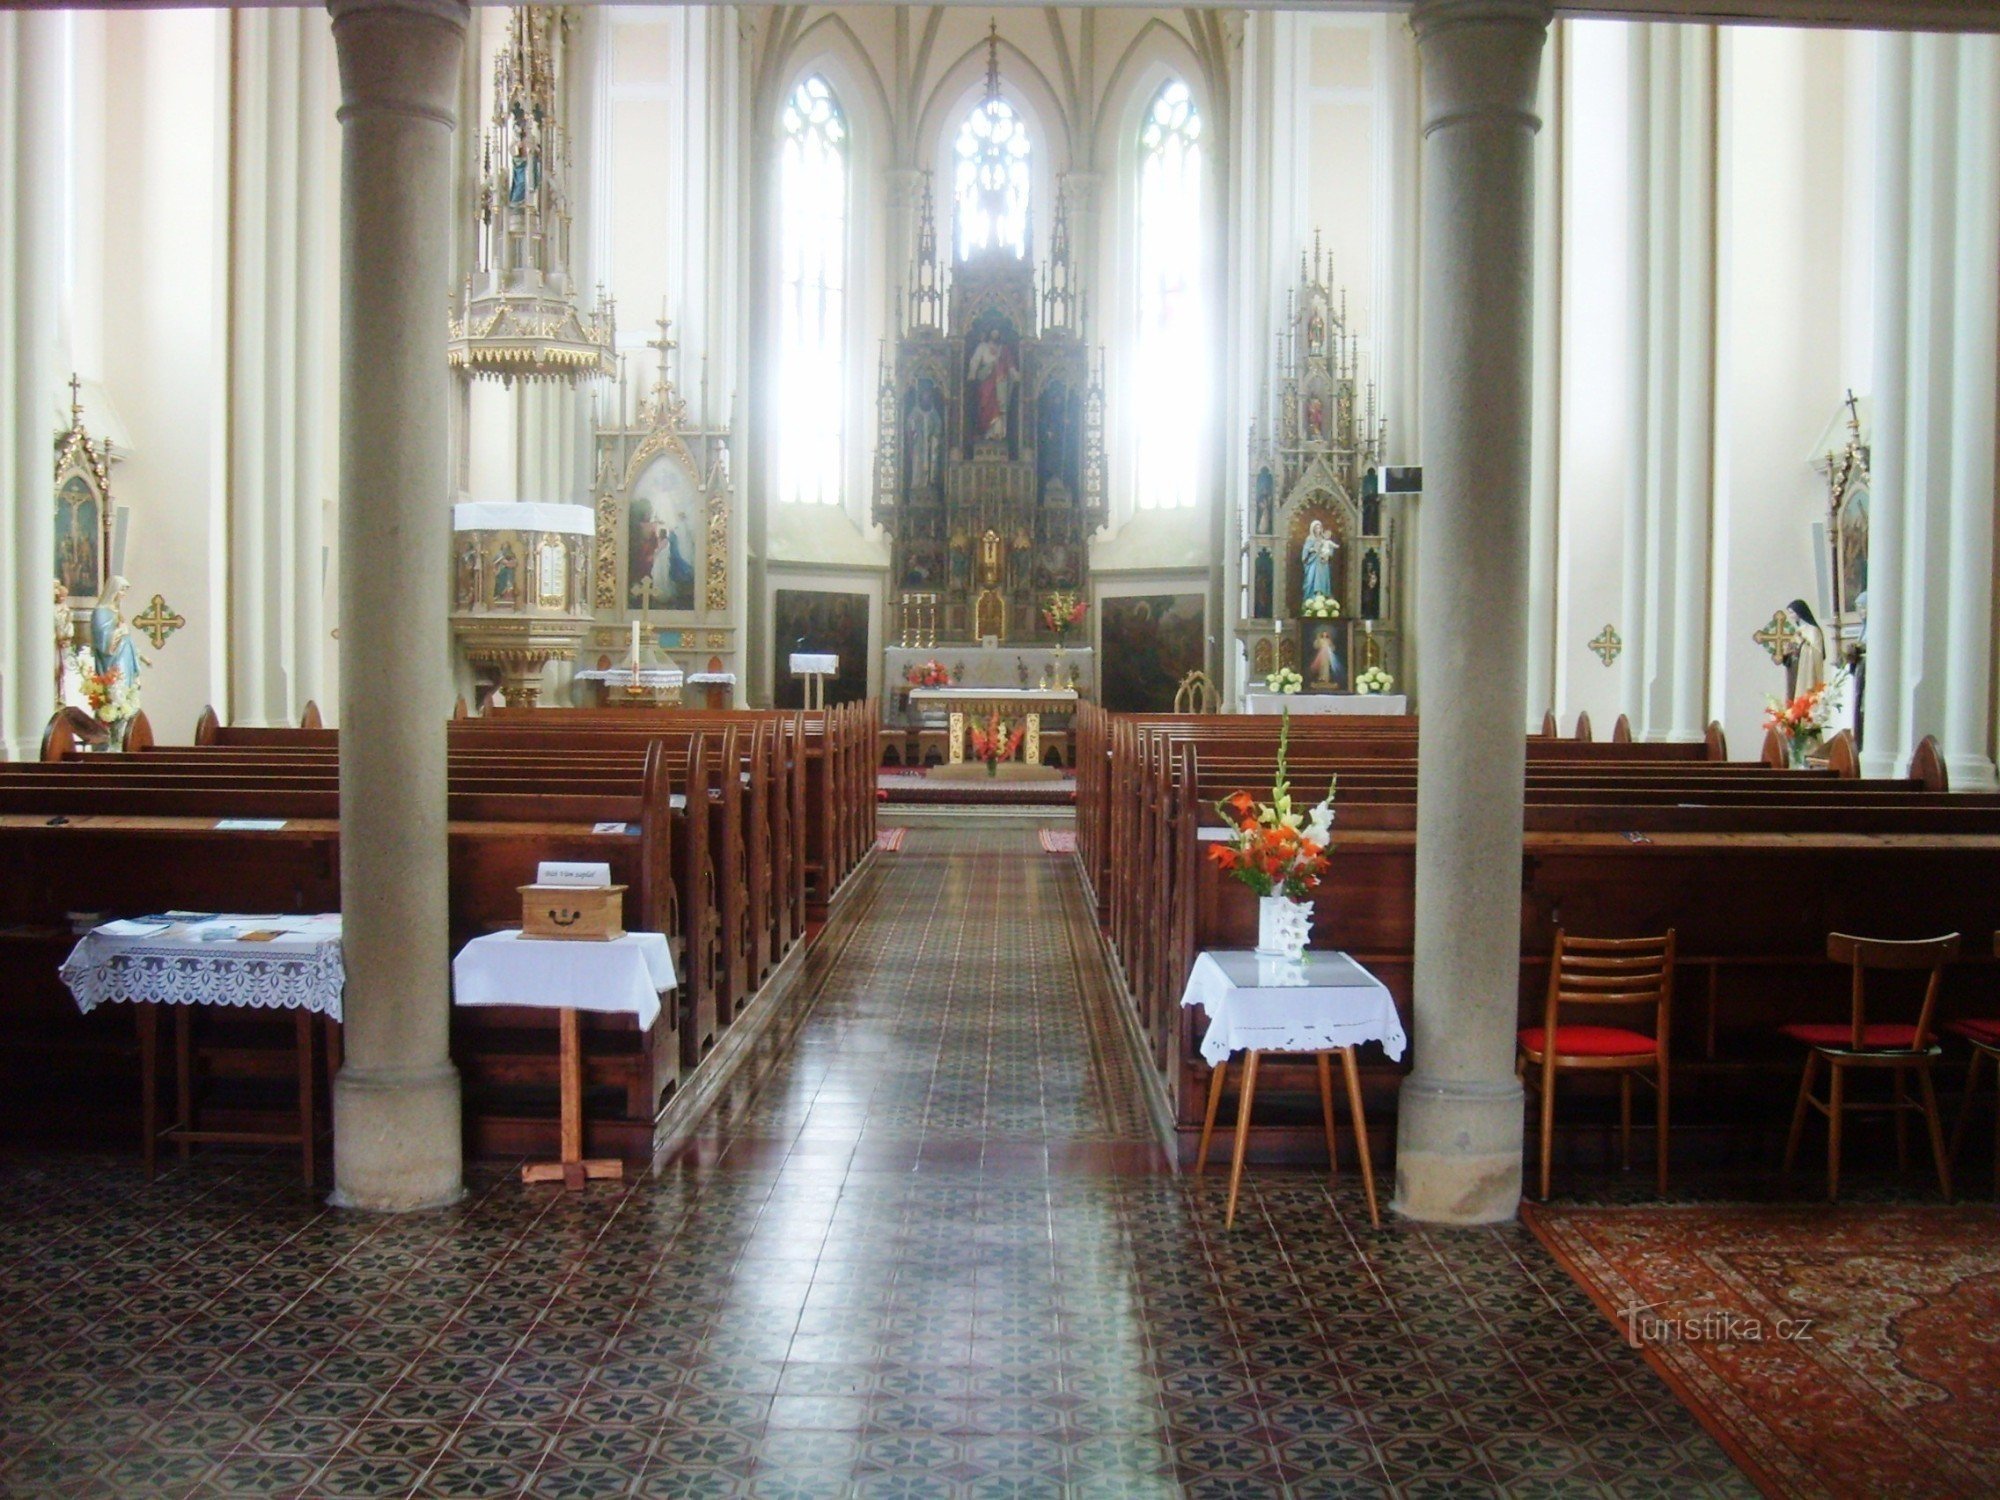 view of the altar